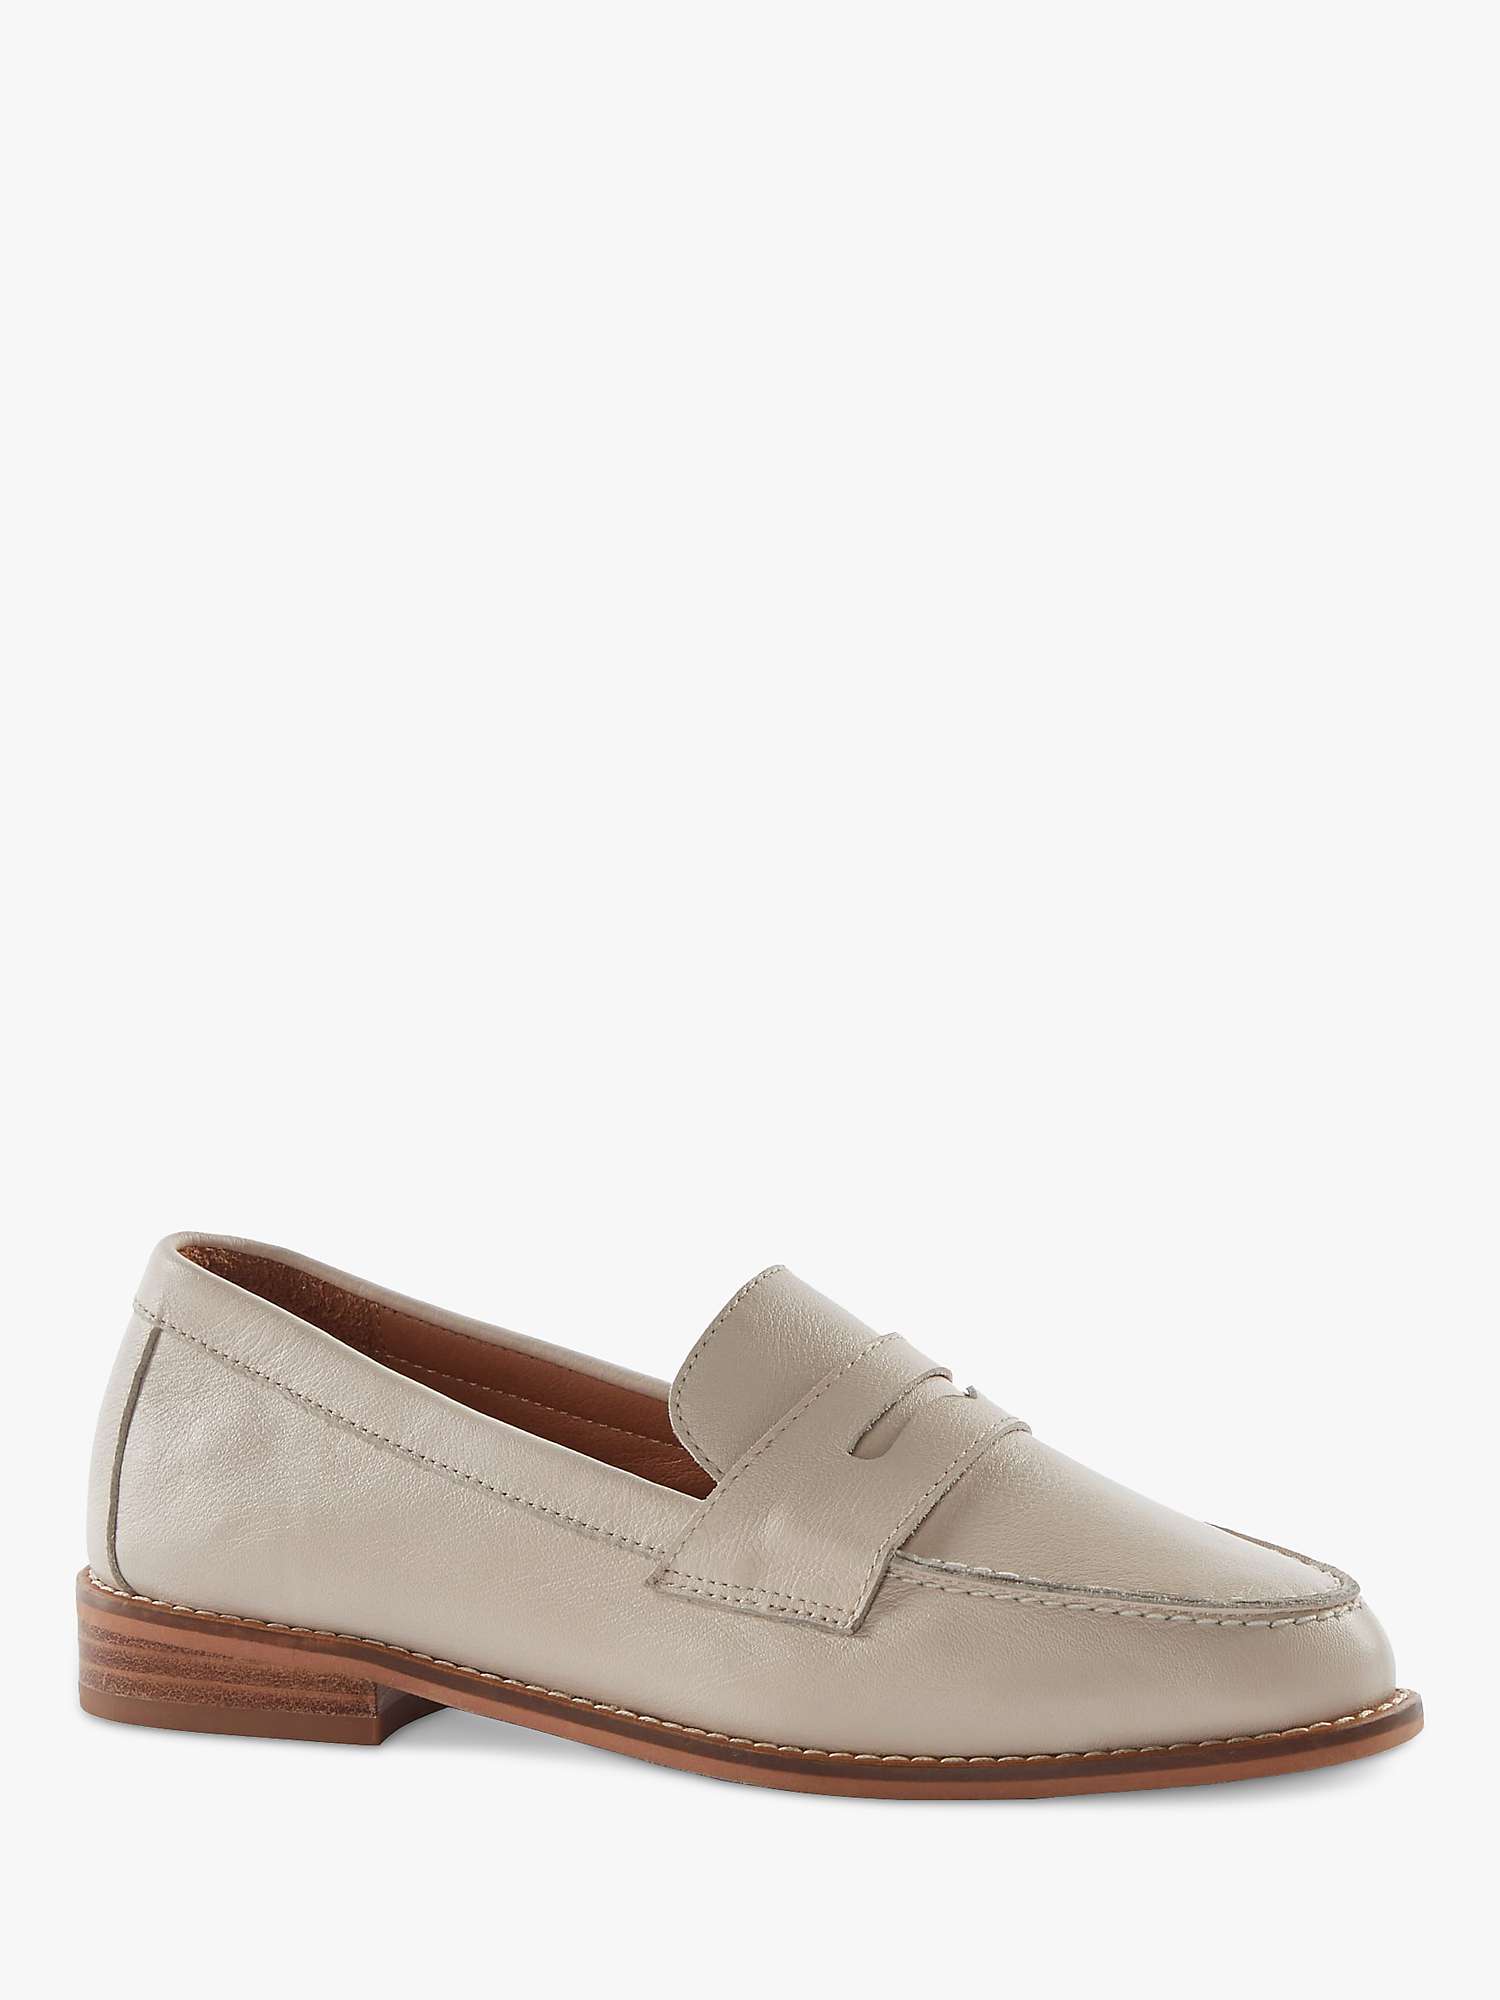 Buy Dune Ginelli Leather Penny Loafers, Ecru Online at johnlewis.com